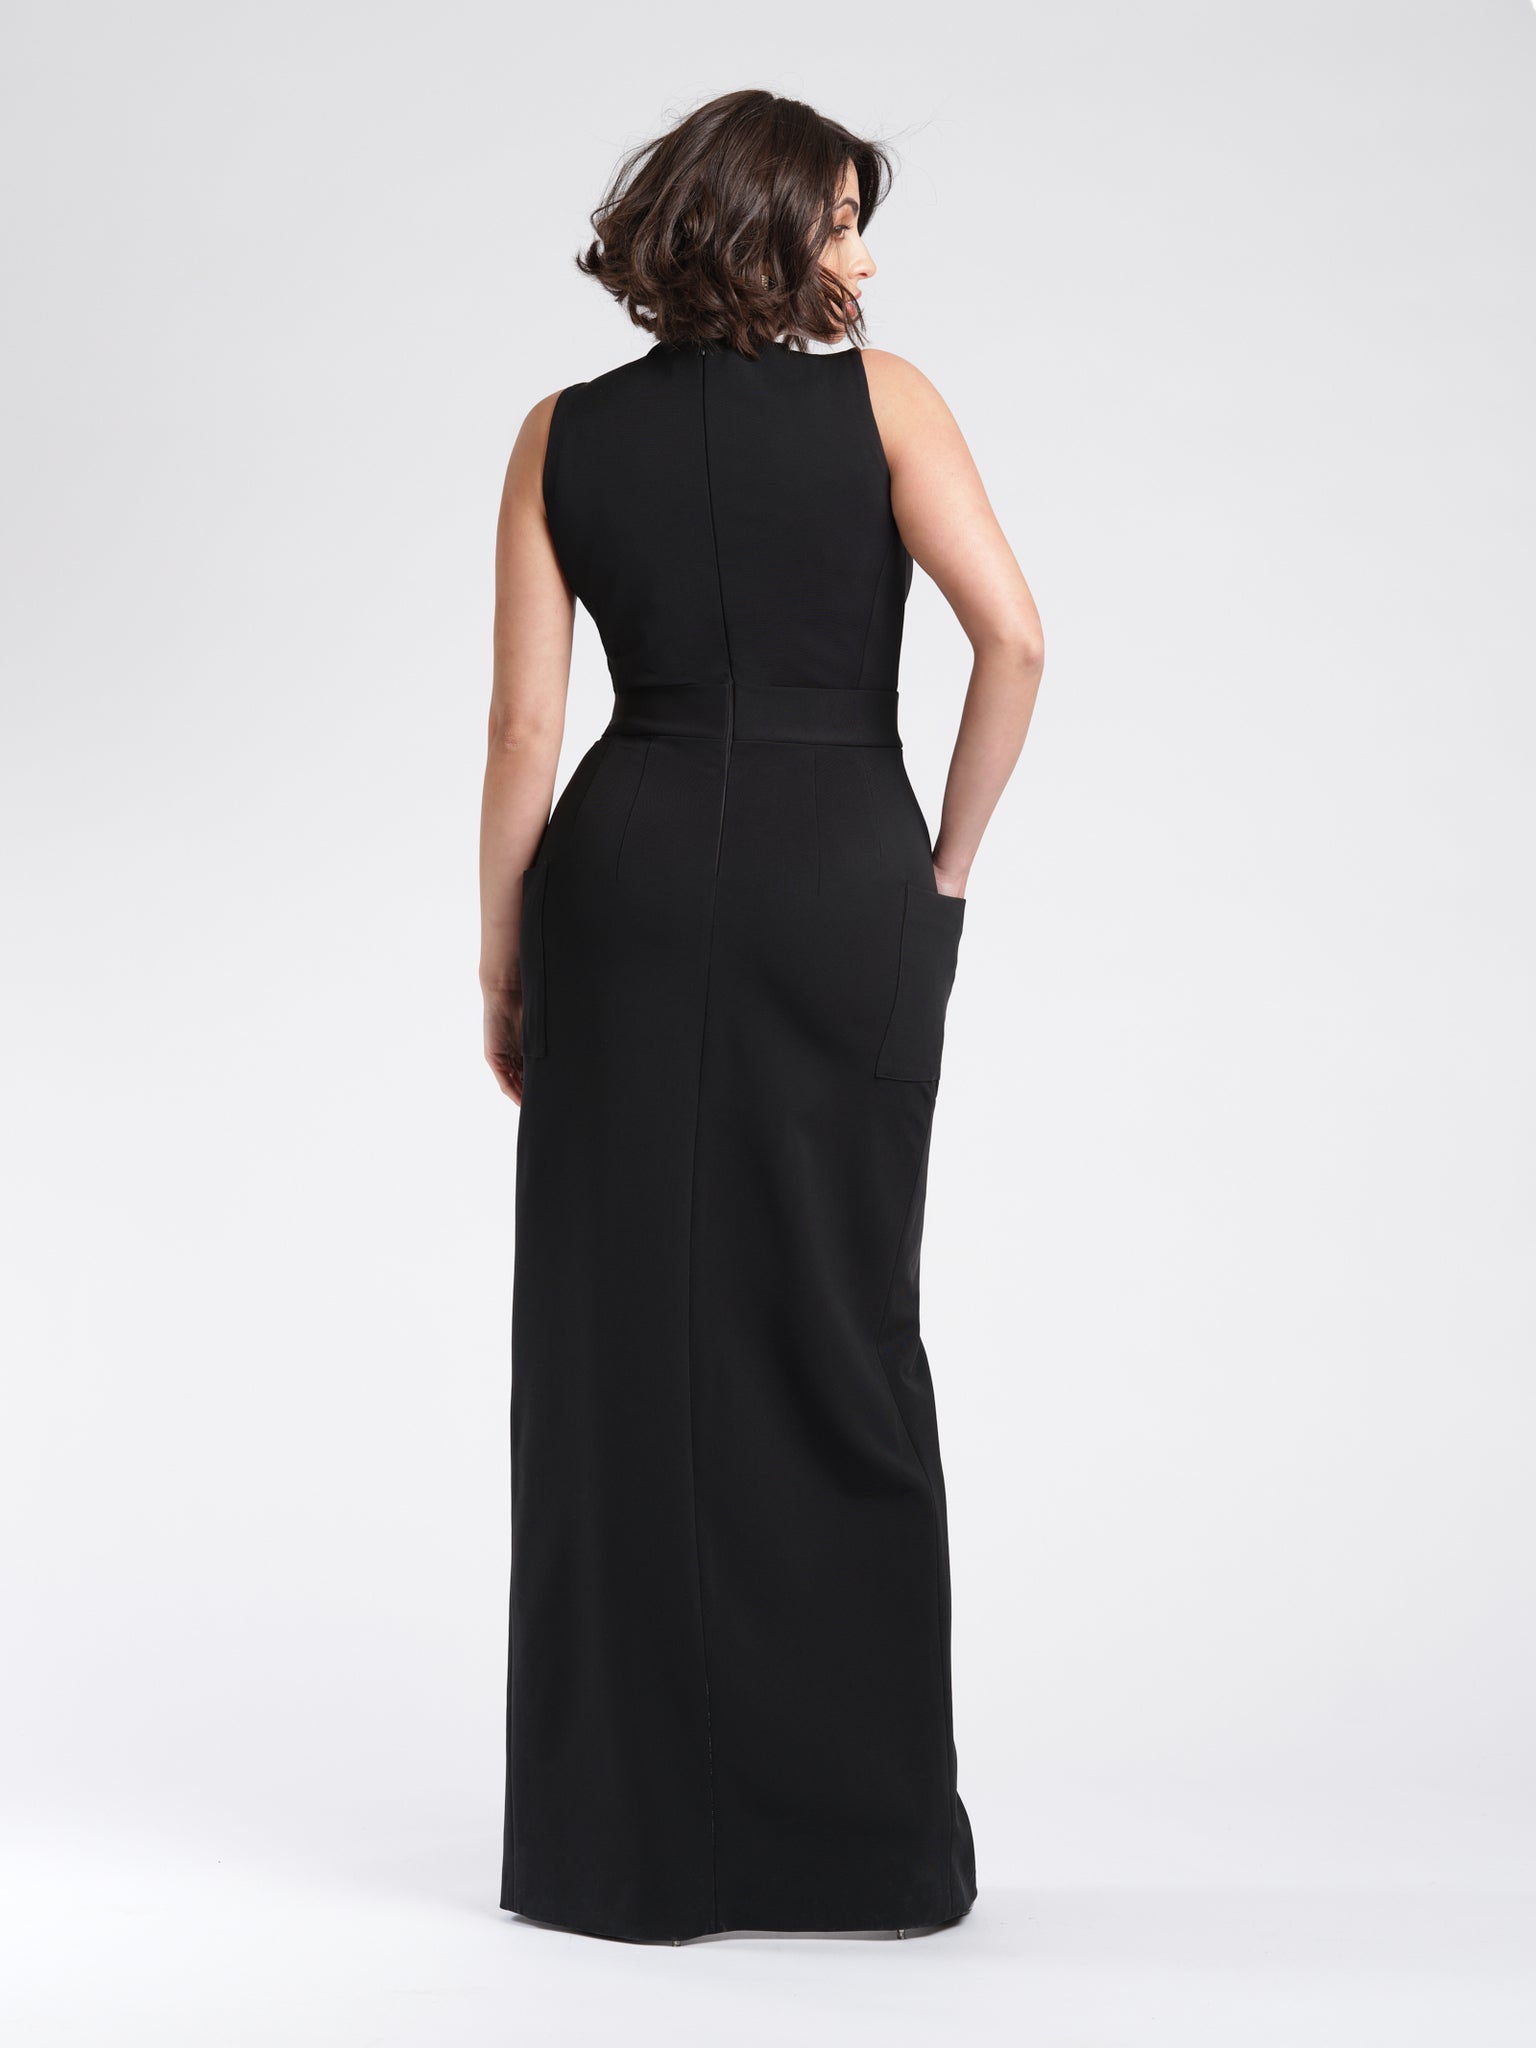 Back view of a size 6 woman wearing a luxury fuller bust stretch viscose evening dress with oversized patch pockets and waist sash detail by Miriam Baker.